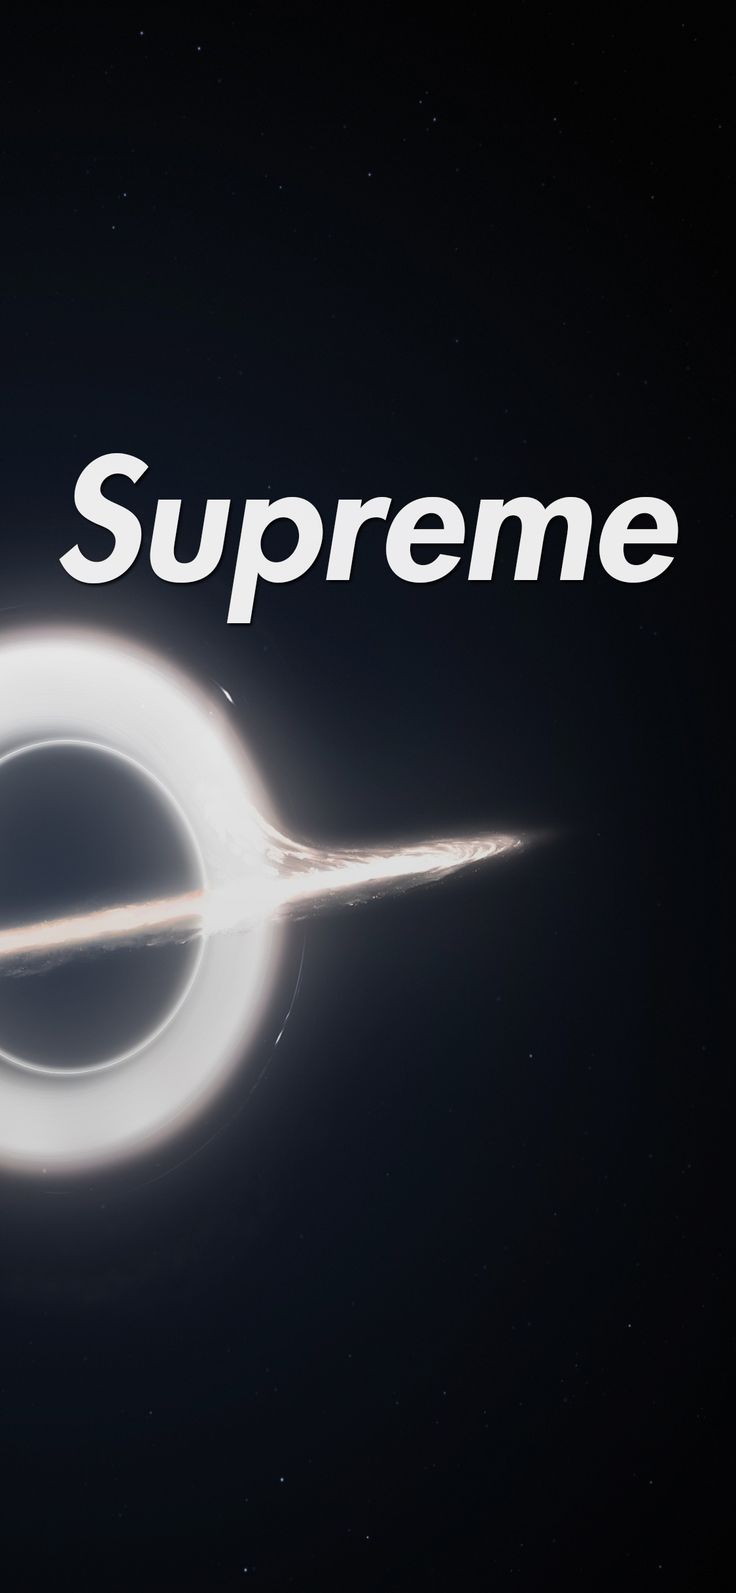 Cool Wallpapers Of Supreme : Tons of awesome supreme wallpapers to ...